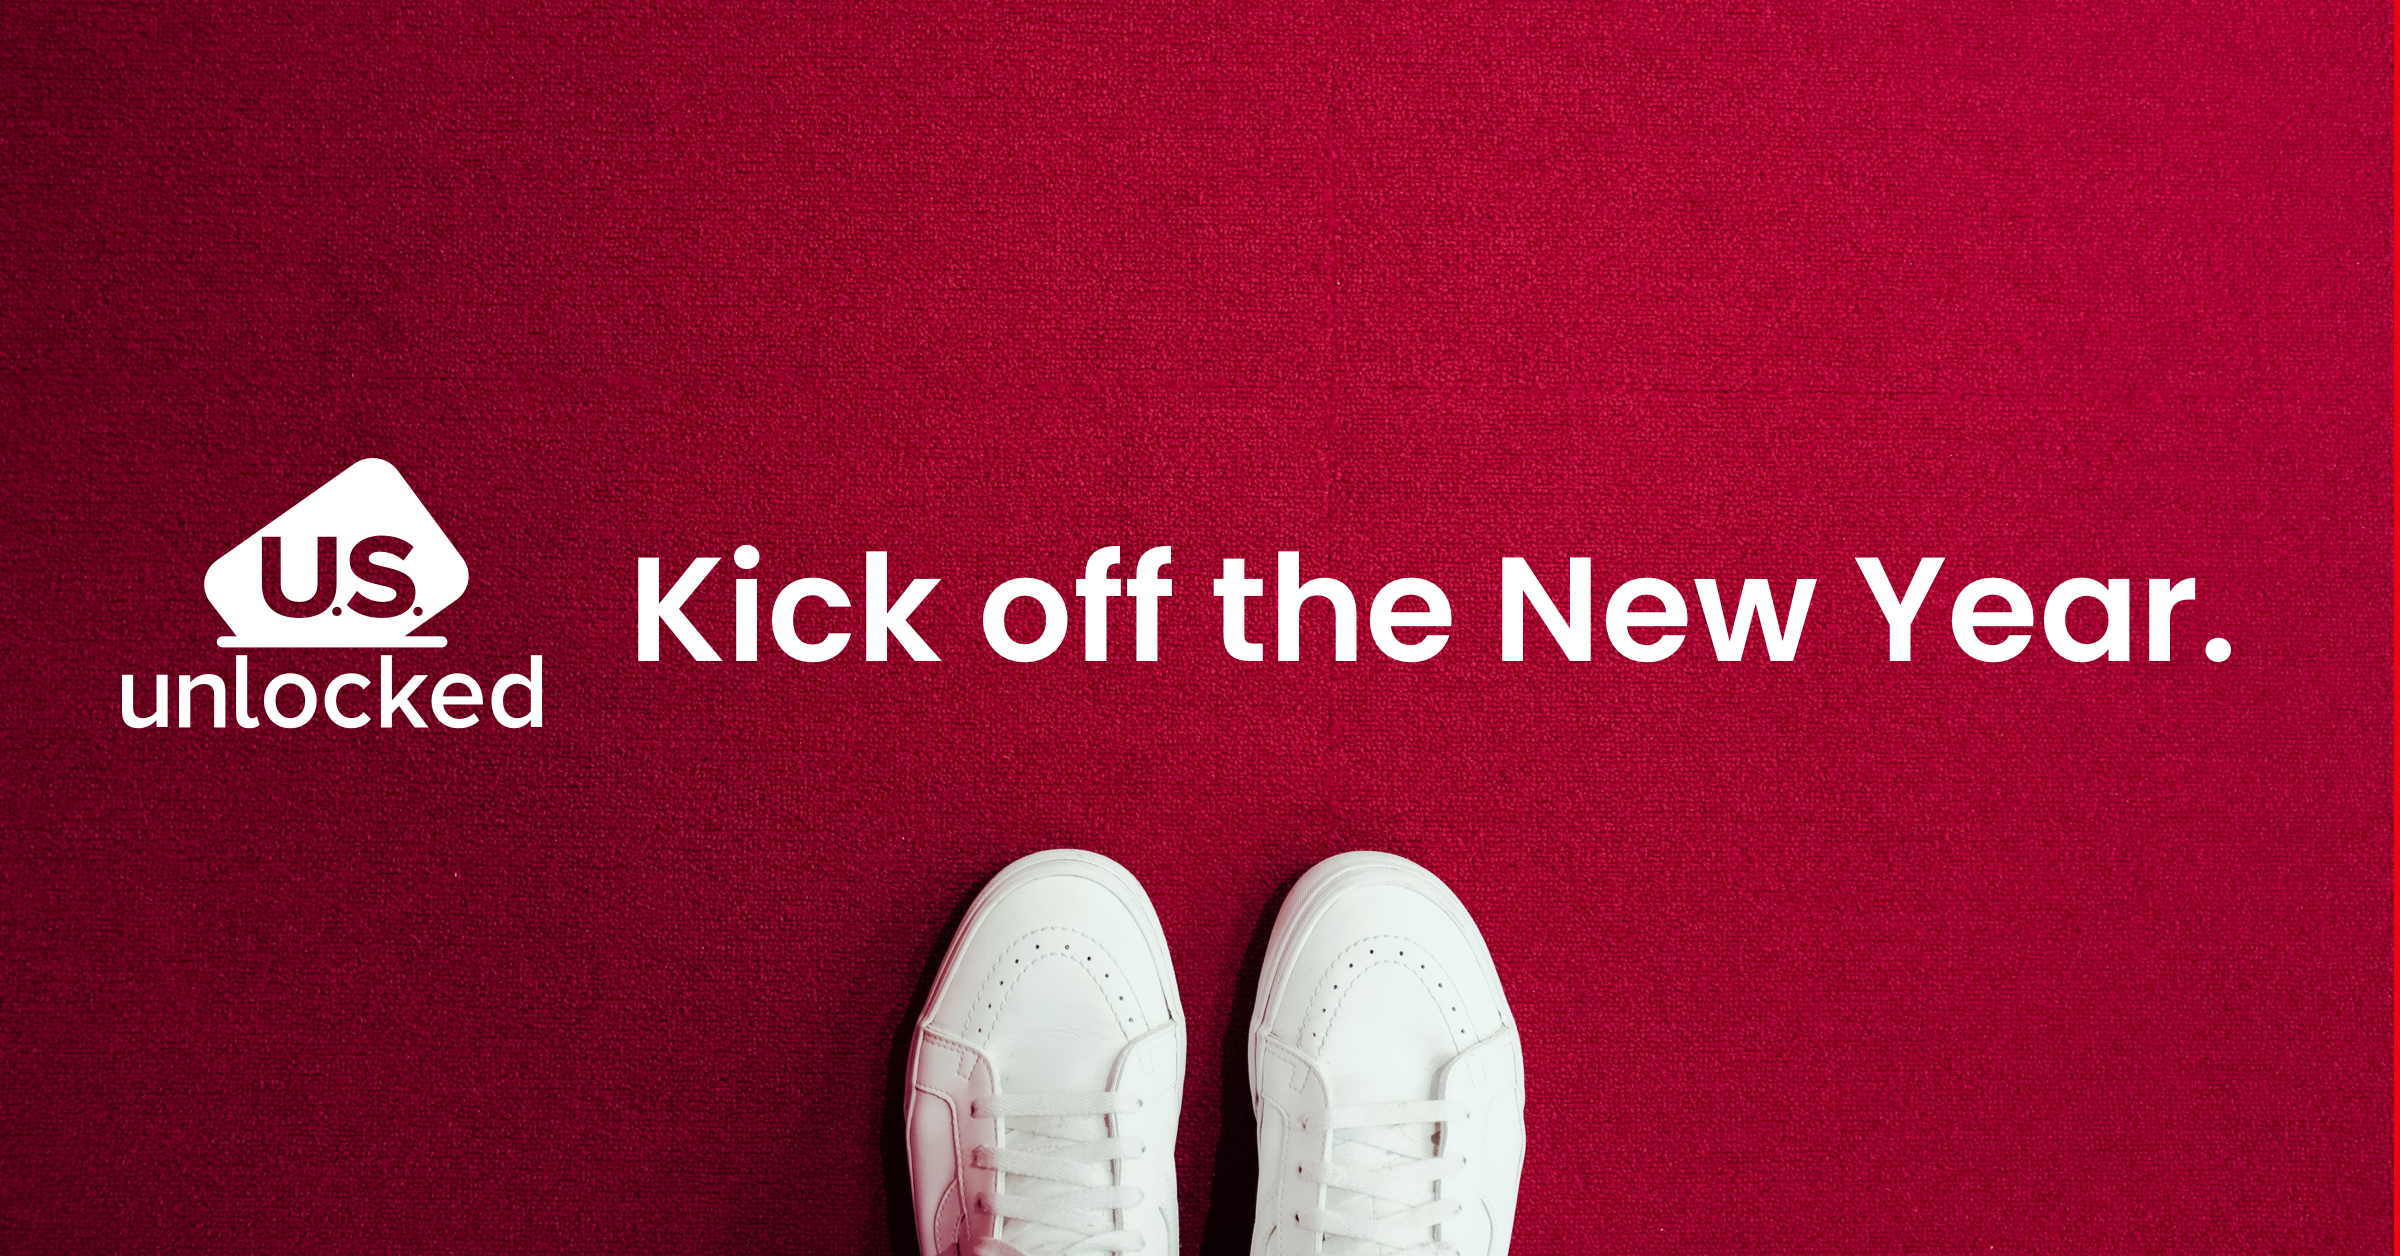 “Kick”-off the New Year with Some Style!